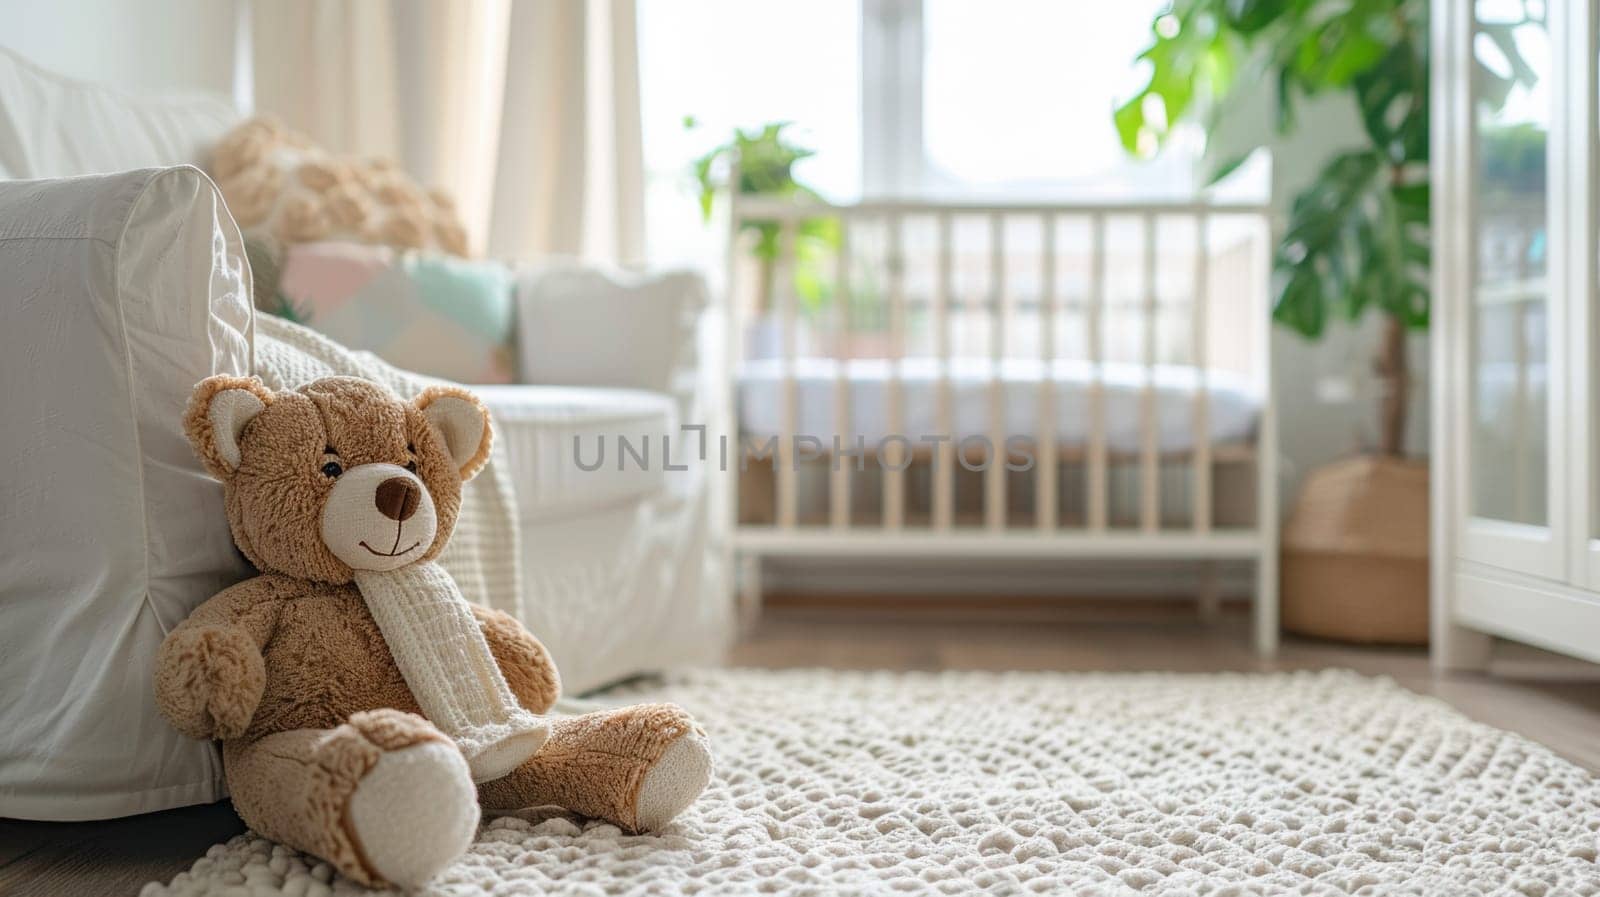 A teddy bear sitting on a white rug in front of the crib